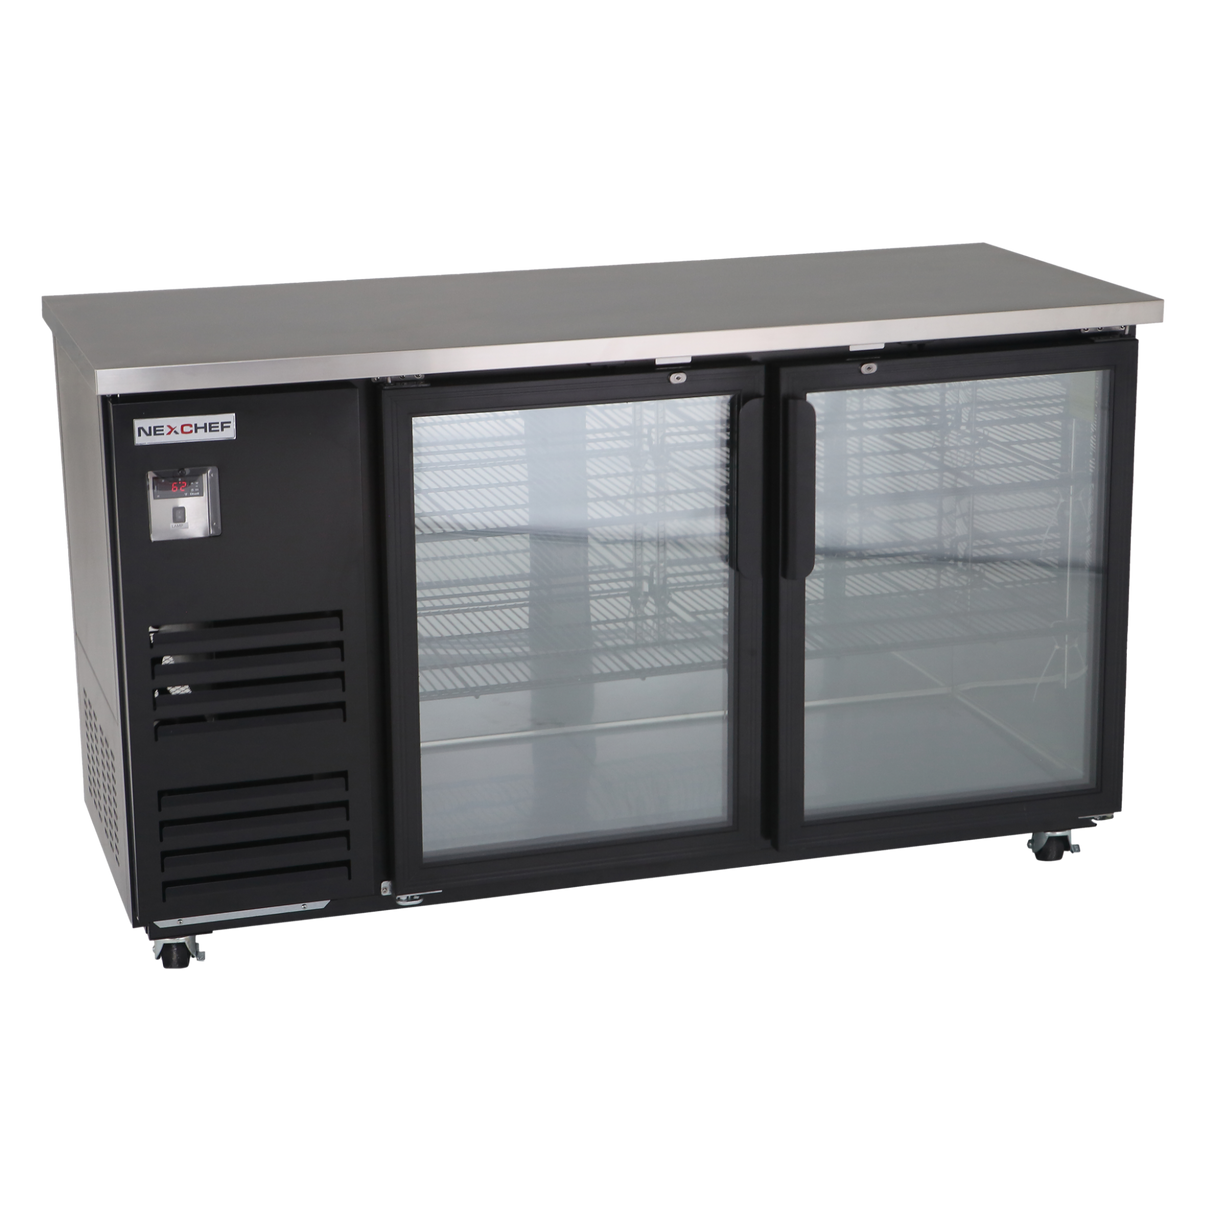 NexChef B70-G2 Commercial 70" Glass  Back Bar Refrigerator, Black Exterior, Two Glass Doors, Counter Height, LED Lighting